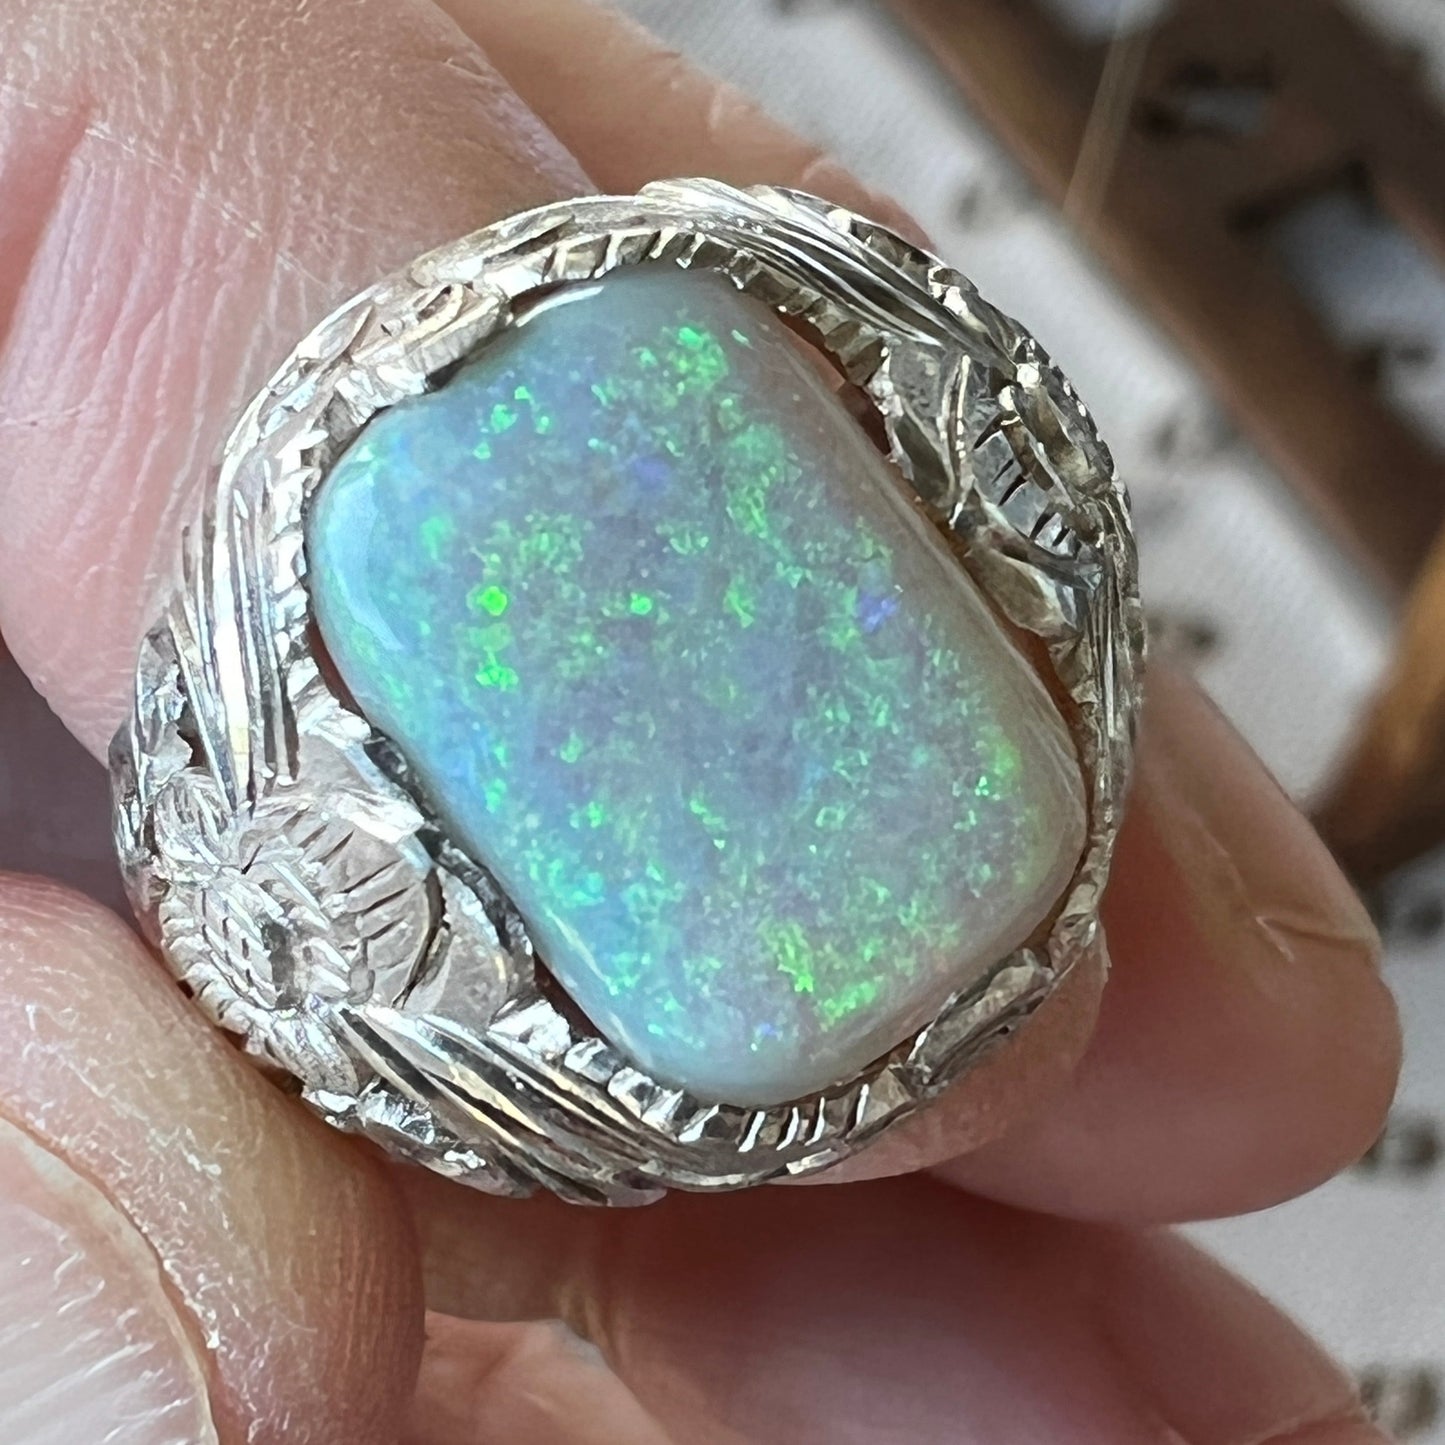 One off perfectly crafted silverwork finished with a beautiful cushion cut Coober Pedy crystal opal showing awesome greens.